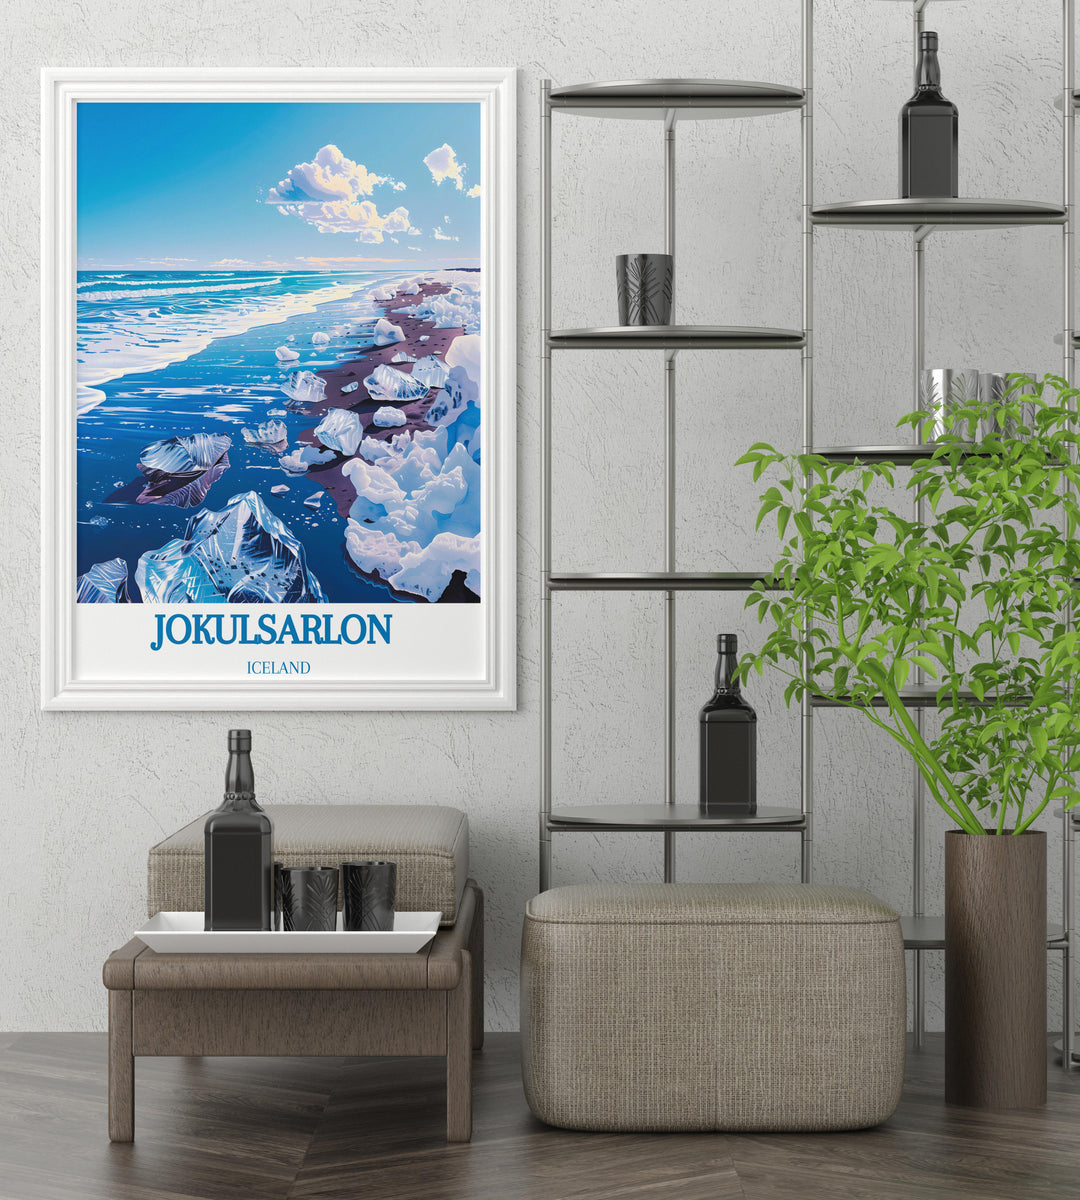 Wall art depicting the famous Blue Lagoon in Iceland suitable for creating a calming atmosphere in personal or professional spaces